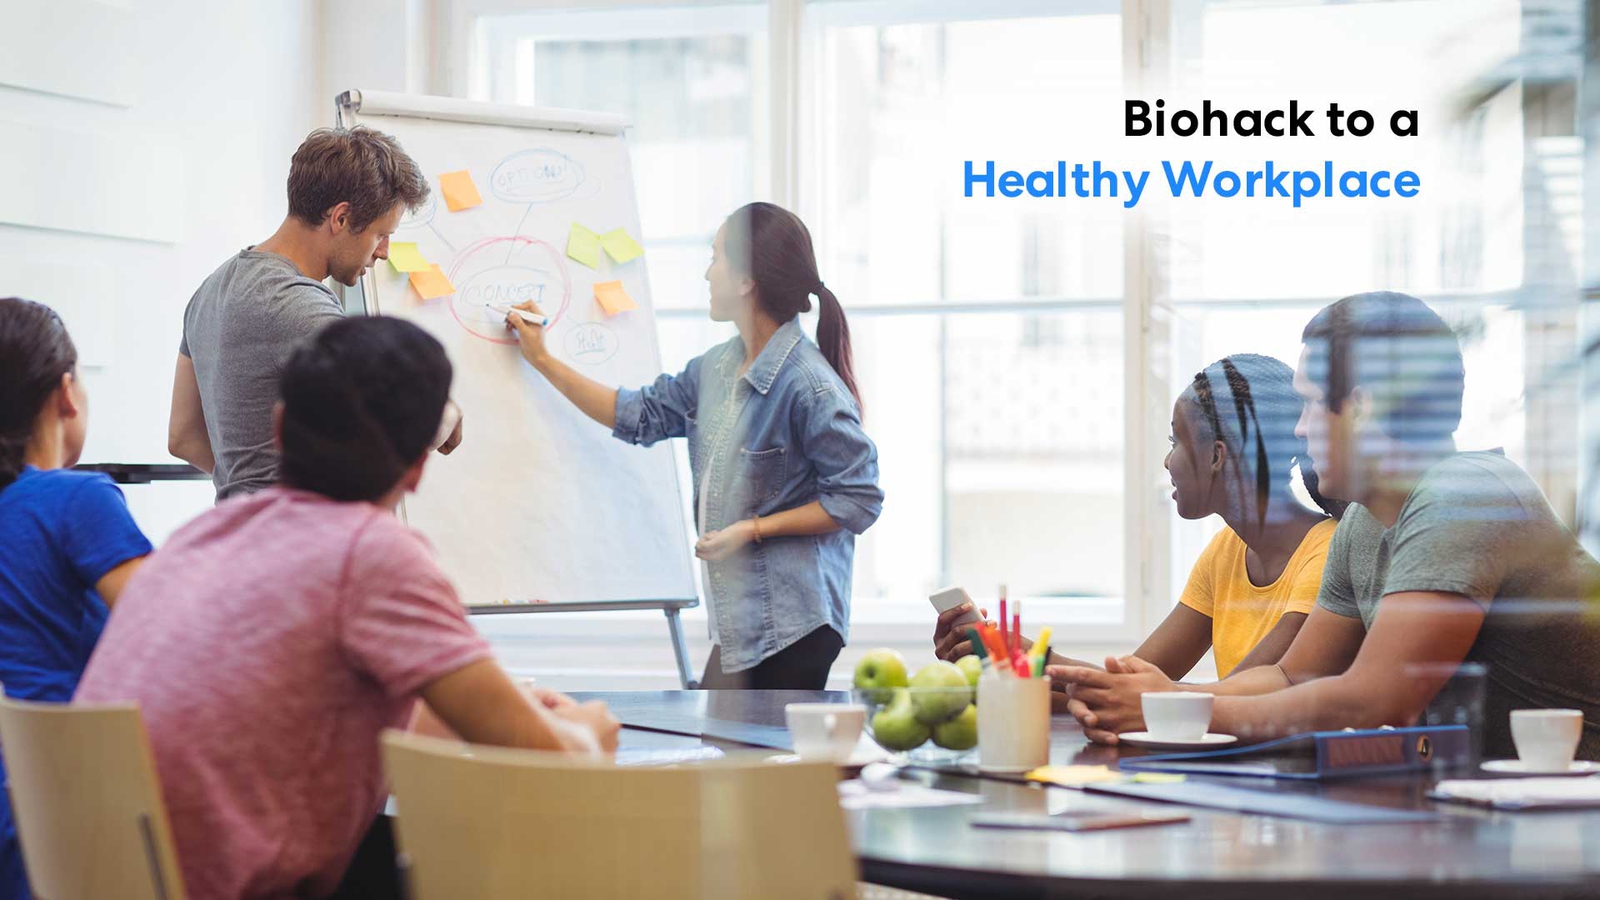 How To Biohack Your Way To A Healthy Workplace